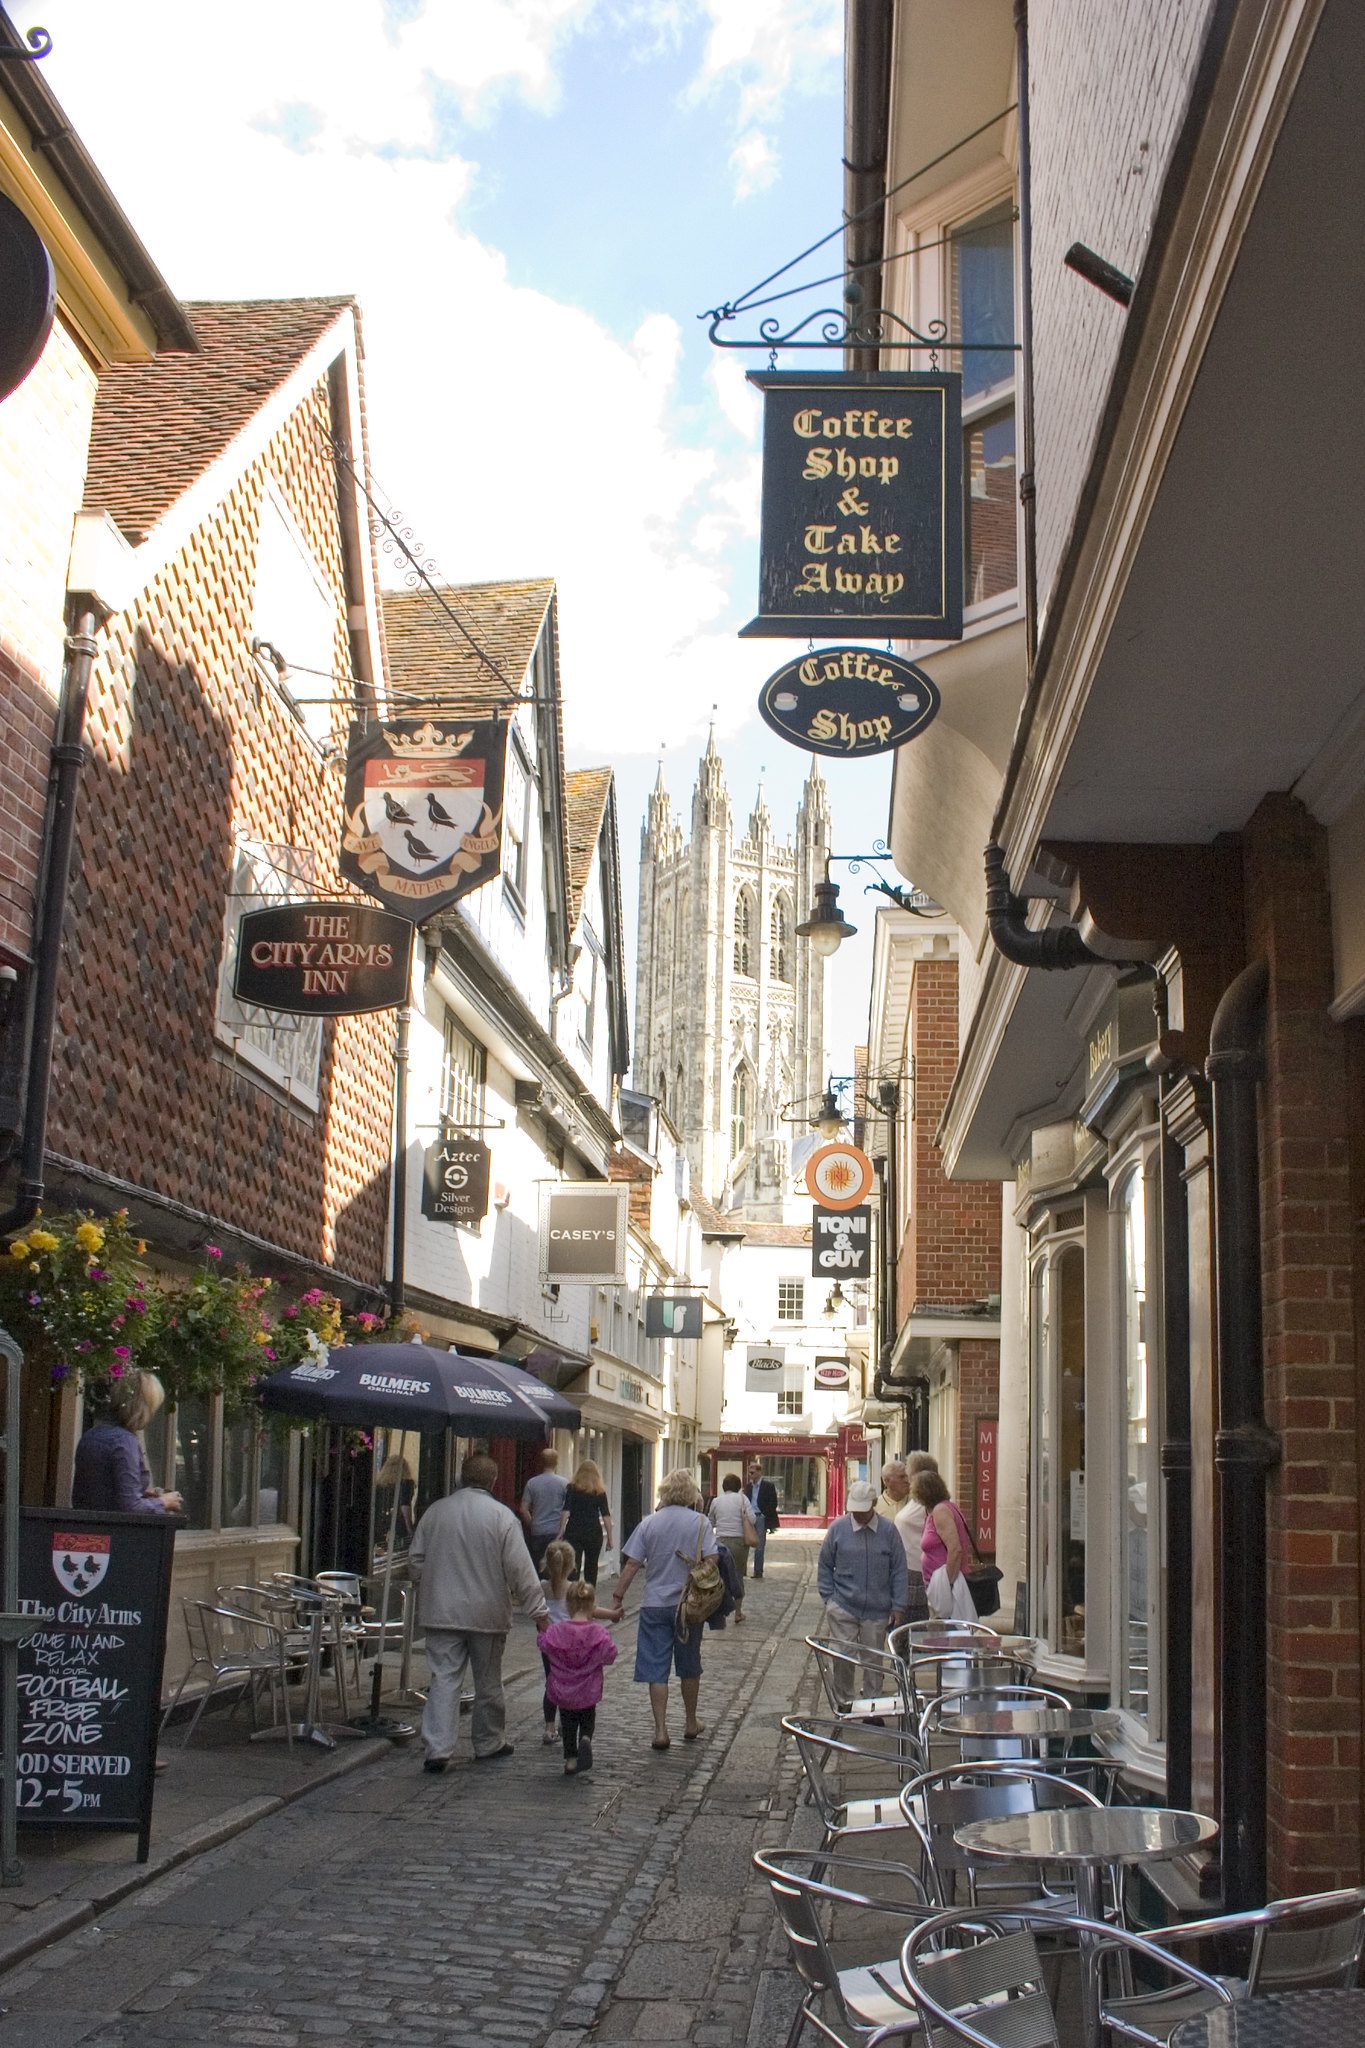 View down a cobbled lane with shops and cafe tables on either side